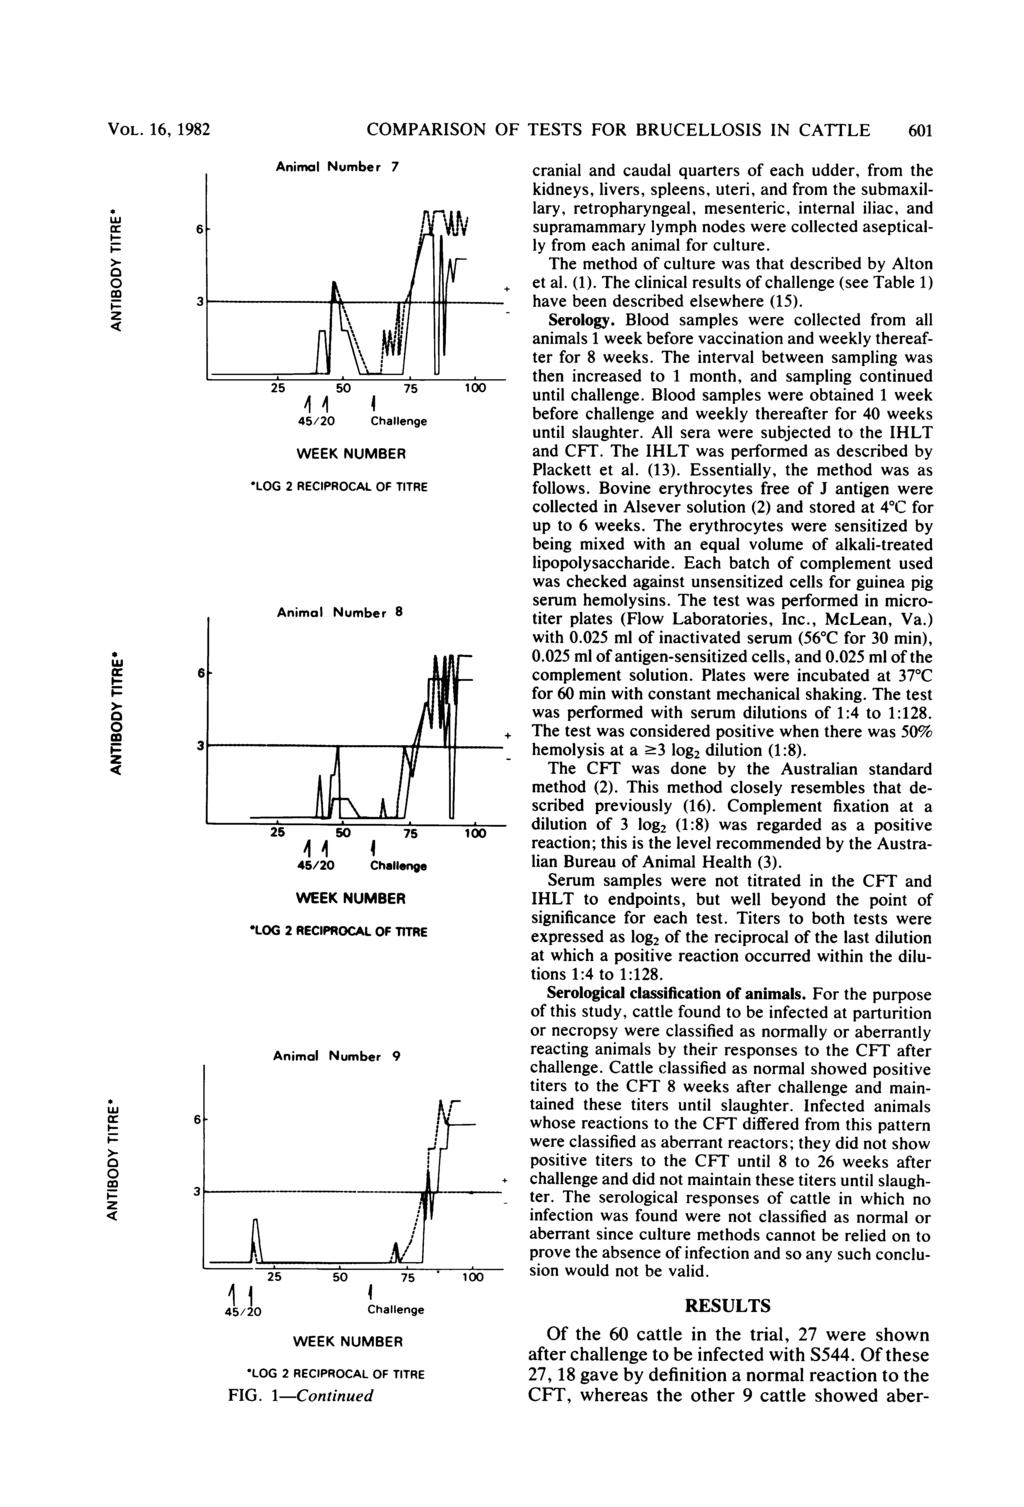 VOL. 1, 1982 cc a o F Fcc F co - 3j a COMPARISON OF TESTS FOR BRUCELLOSIS IN CATTLE 1 Animal Number 7 cranial and caudal quarters of each udder, from the kidneys, livers, spleens, uteri, and from the